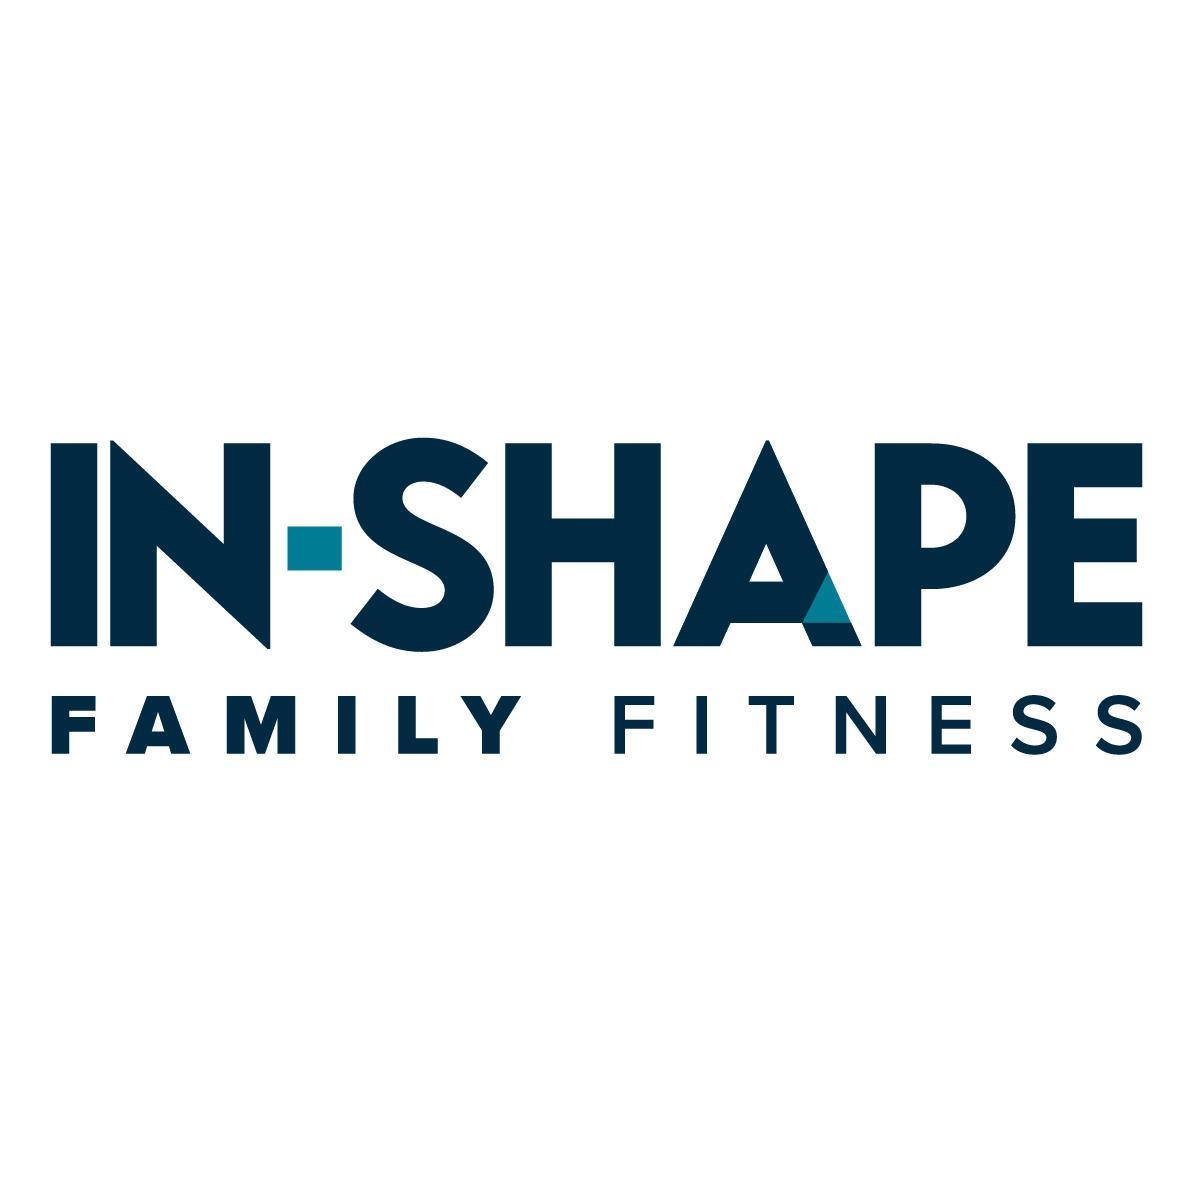 In-Shape Family Fitness Corporate